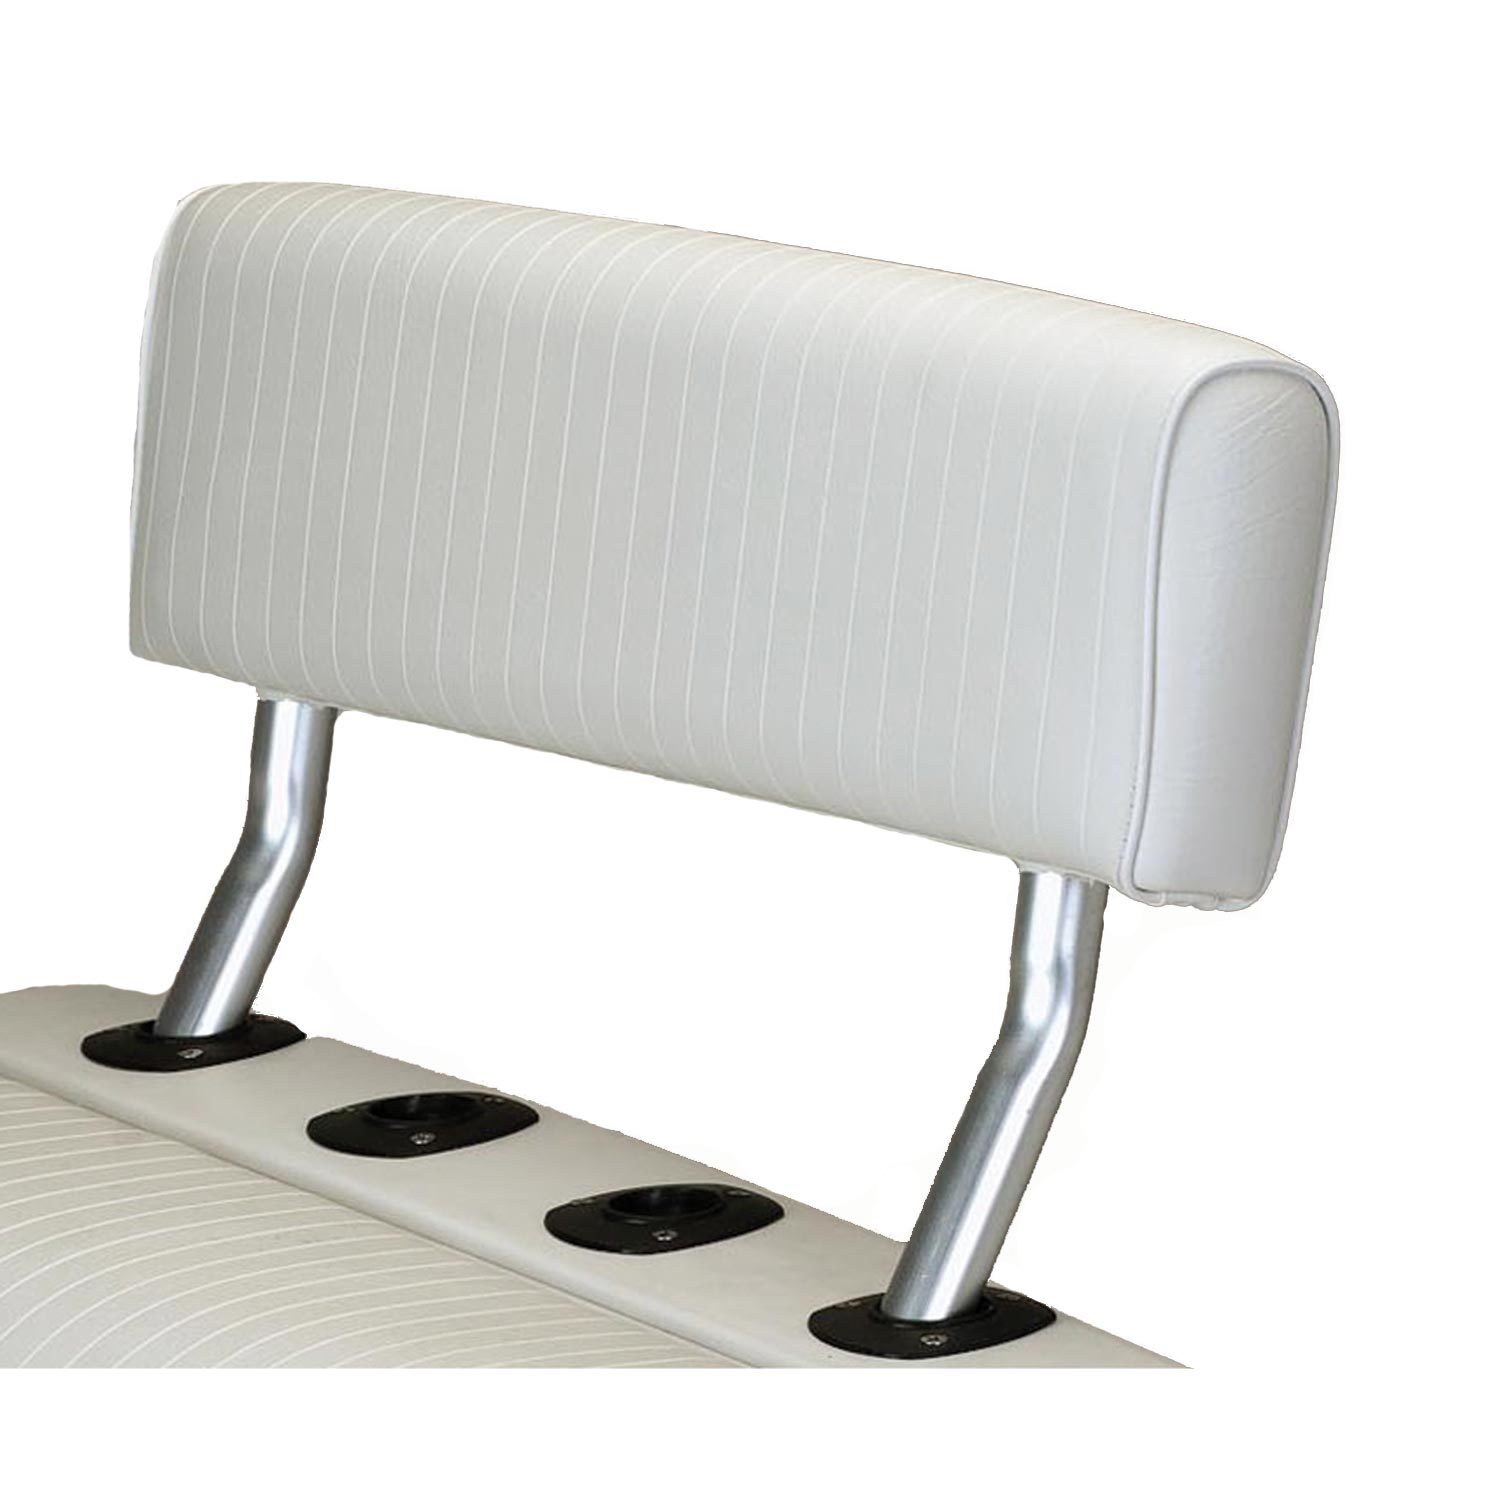 Removable Leaning Post backrest cushion 30 X 7 - Action Craft